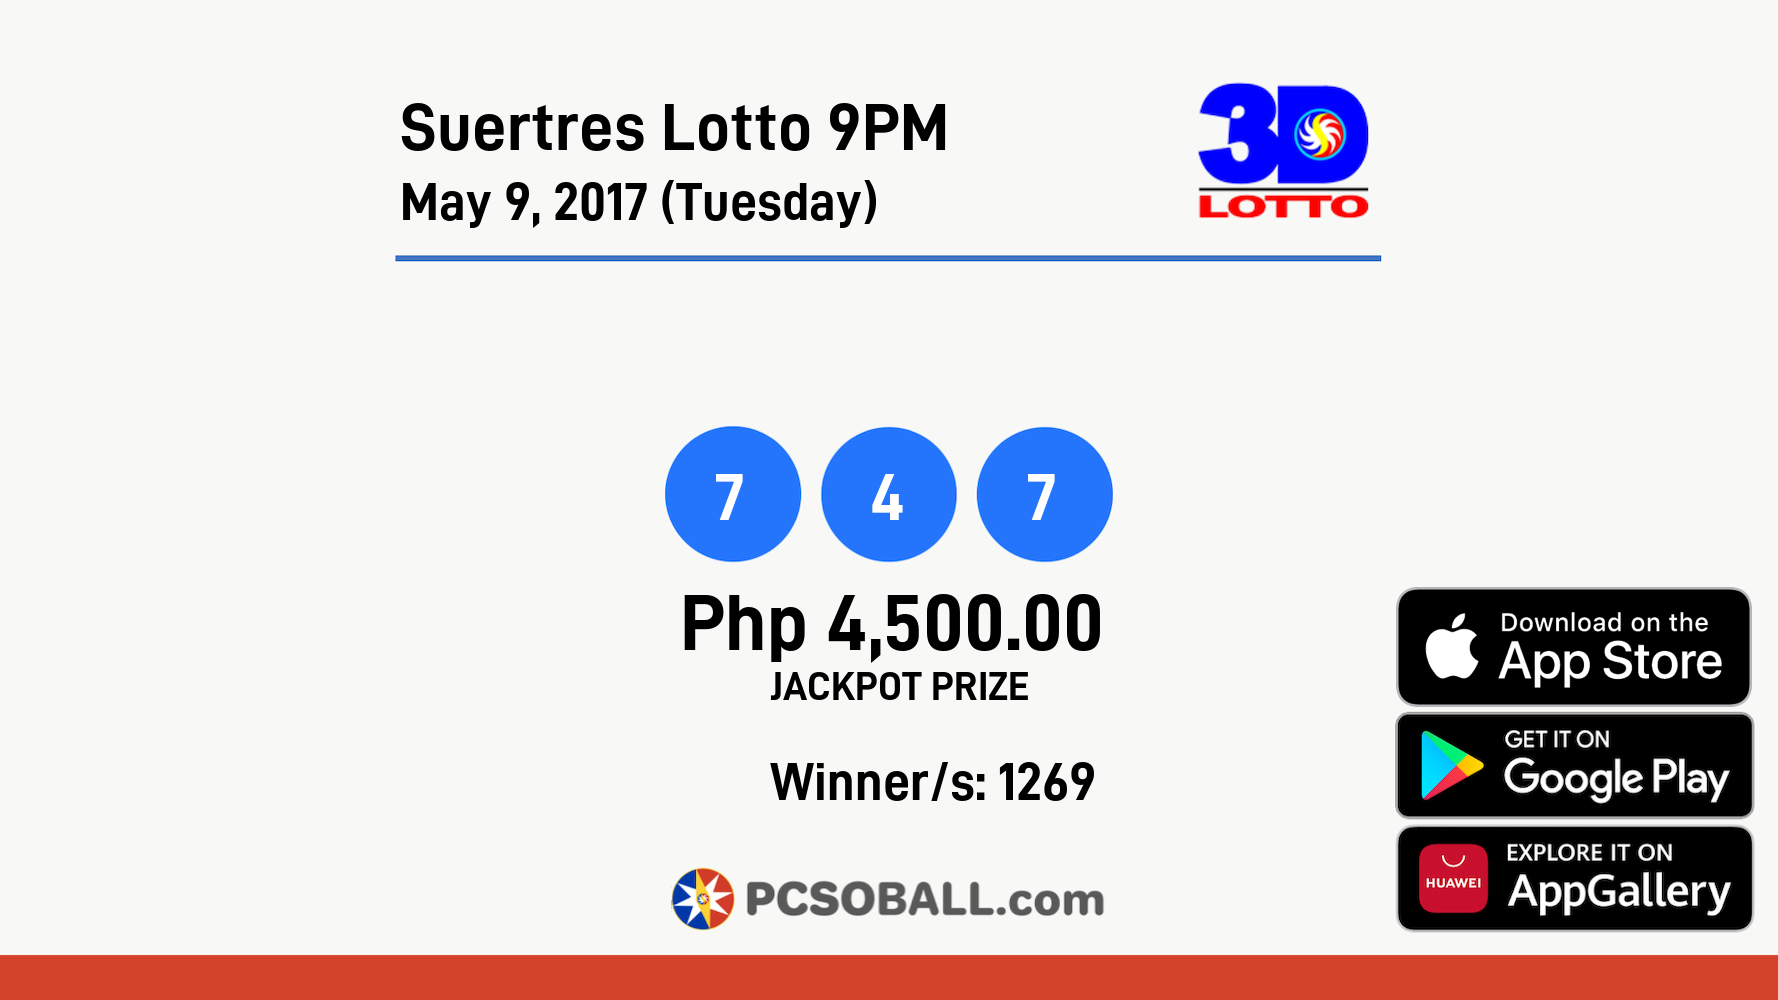 Suertres Lotto 9PM May 9, 2017 (Tuesday) Result